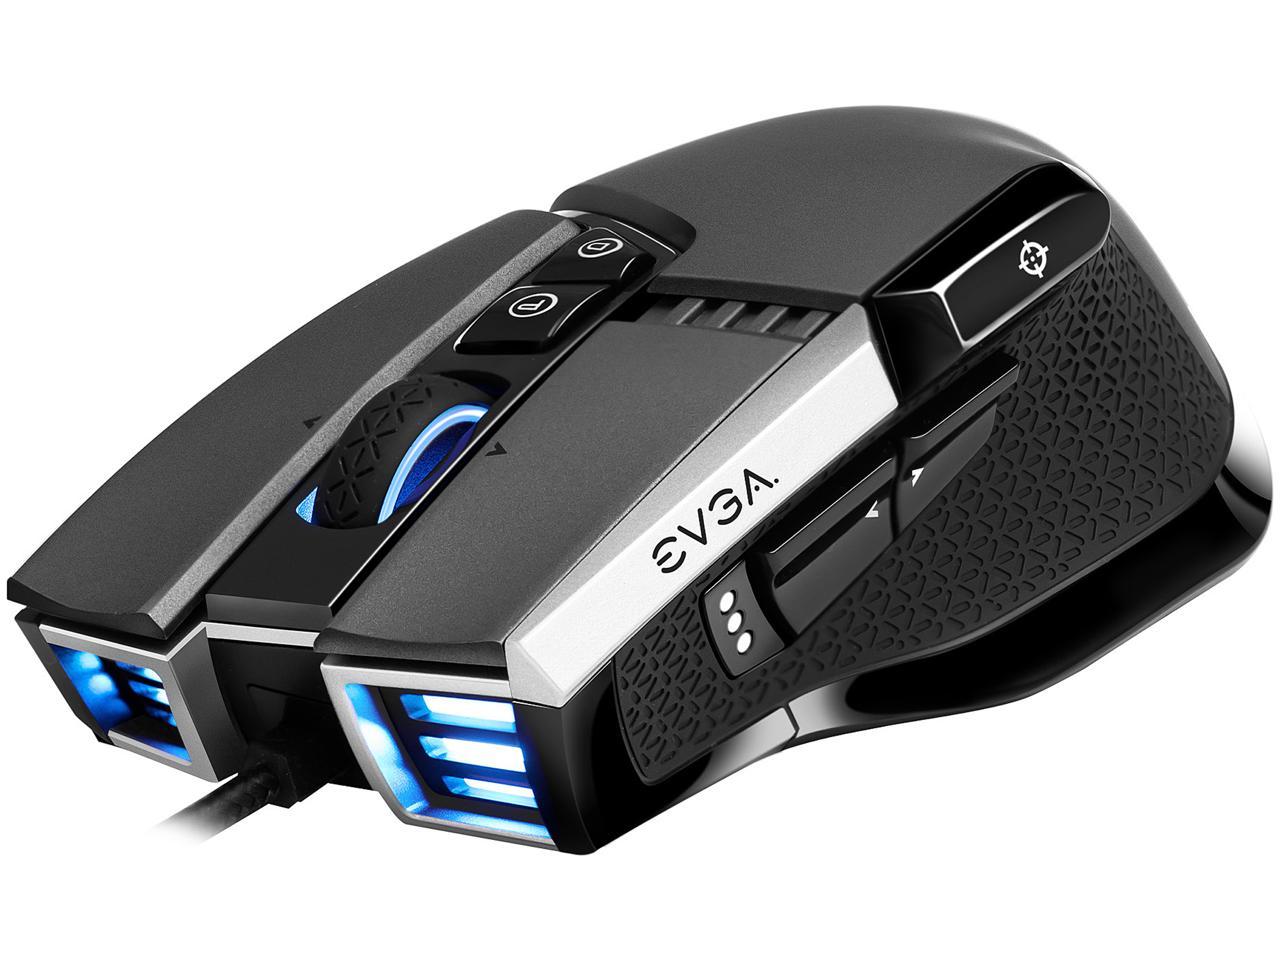 EVGA X17 16000 DPI 10-Button Wired Optical Gaming Mouse (Black) $18 & More + Free Shipping